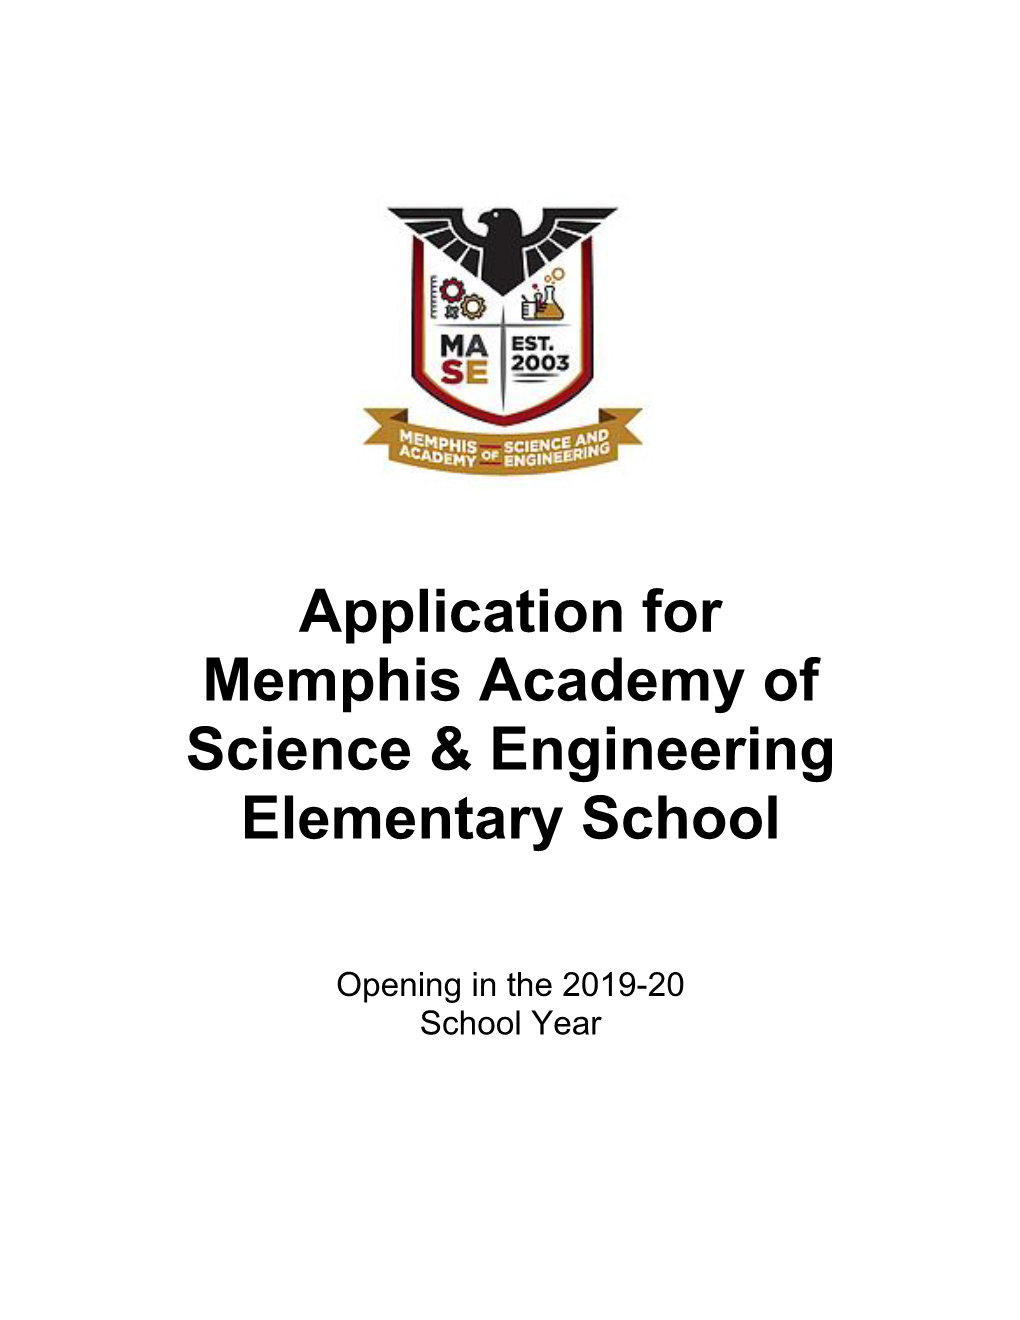 Application for Memphis Academy of Science & Engineering Elementary